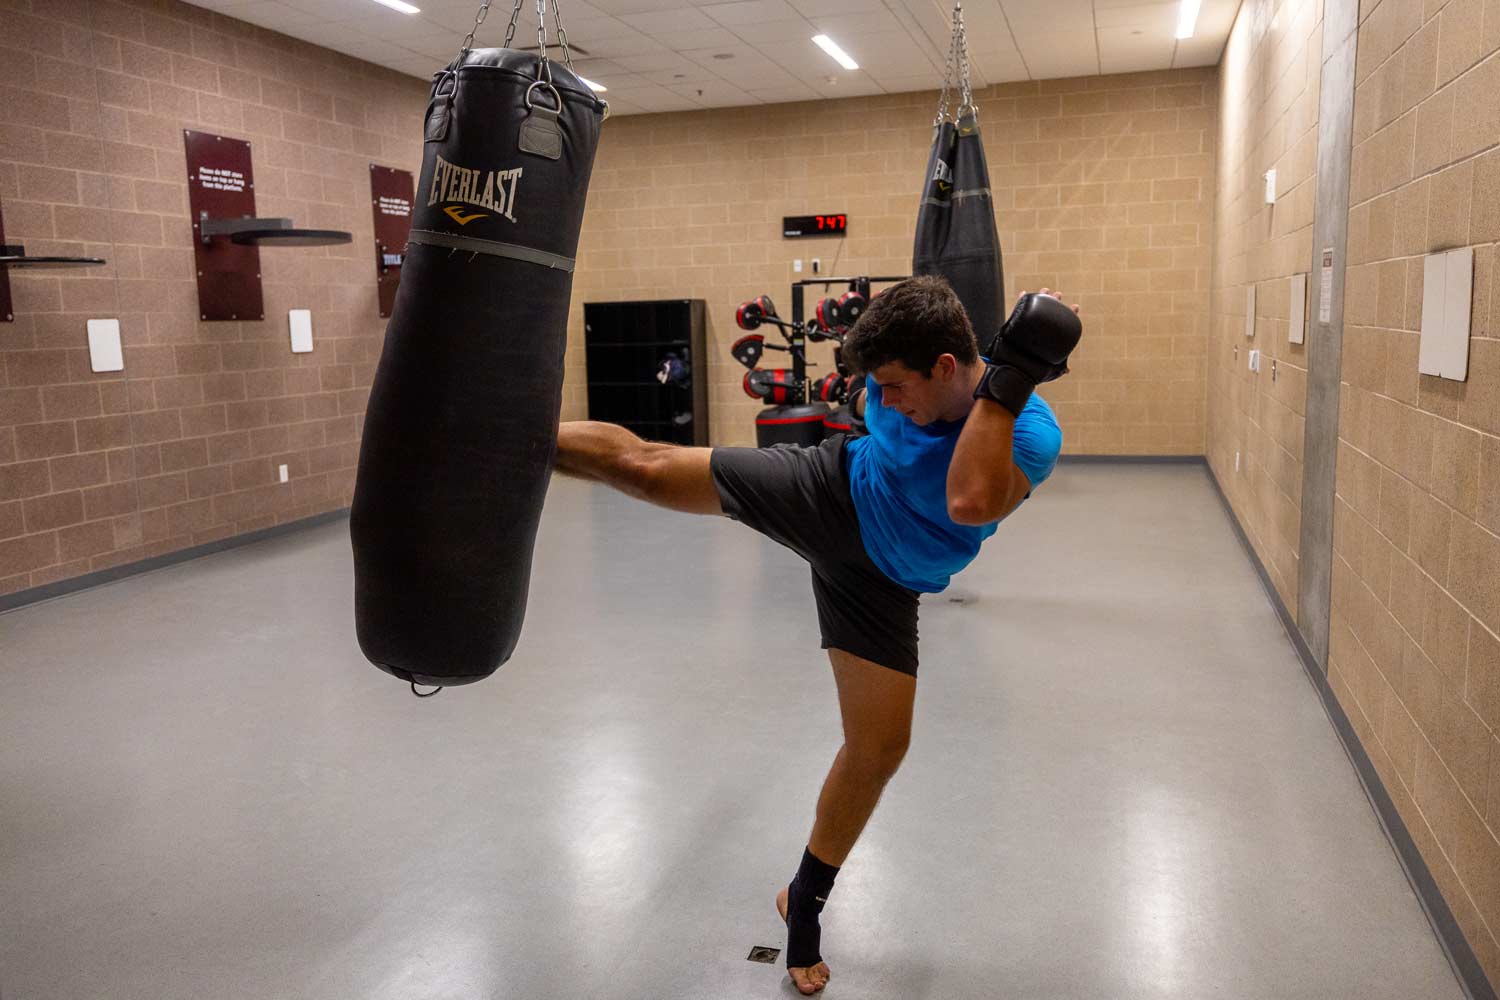 Student uses the boxing equipment and facilities within the West campus rec center